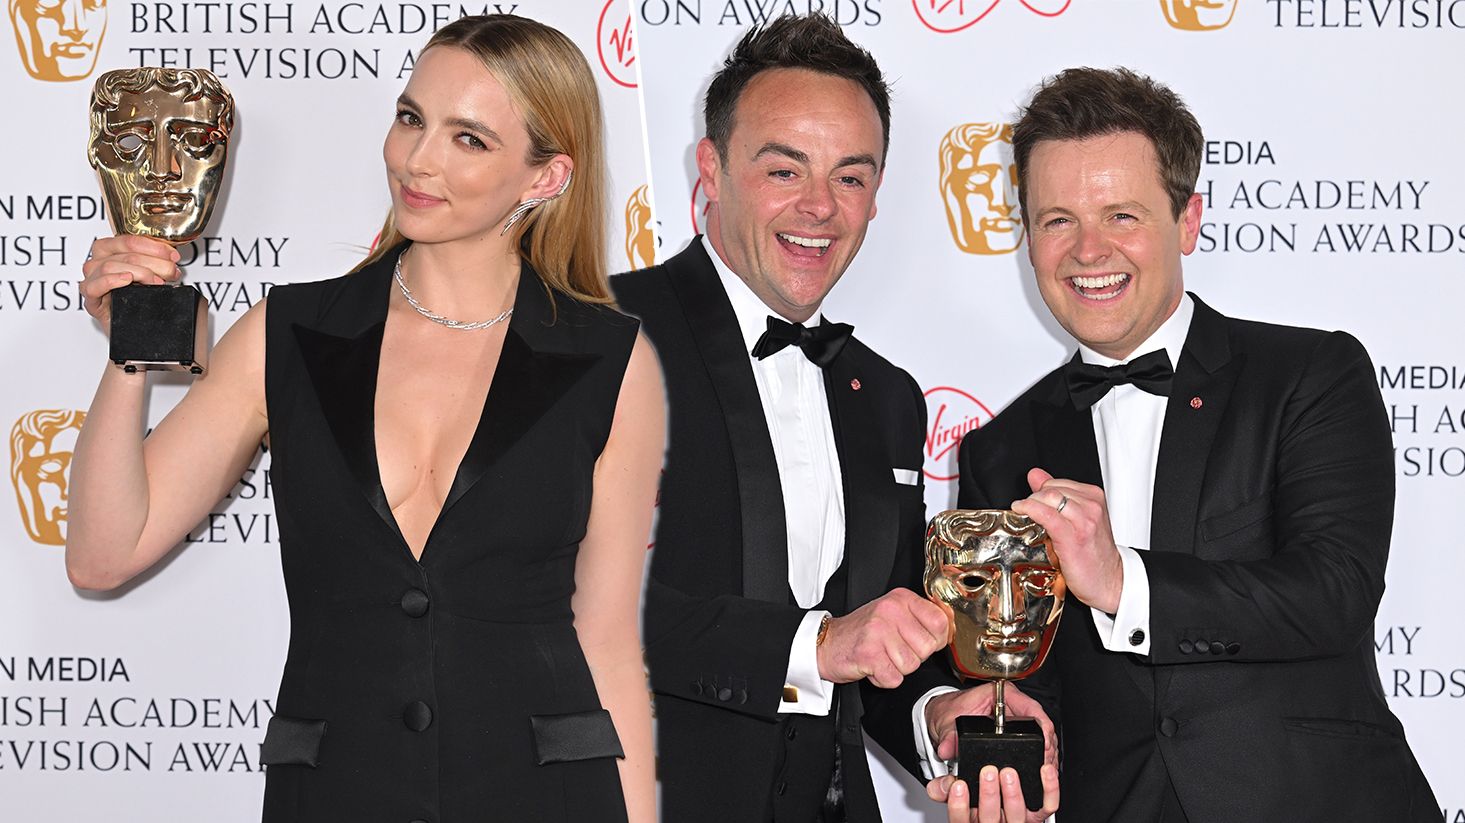 The BAFTA Games Awards are now accepting nominees - MCV/DEVELOP